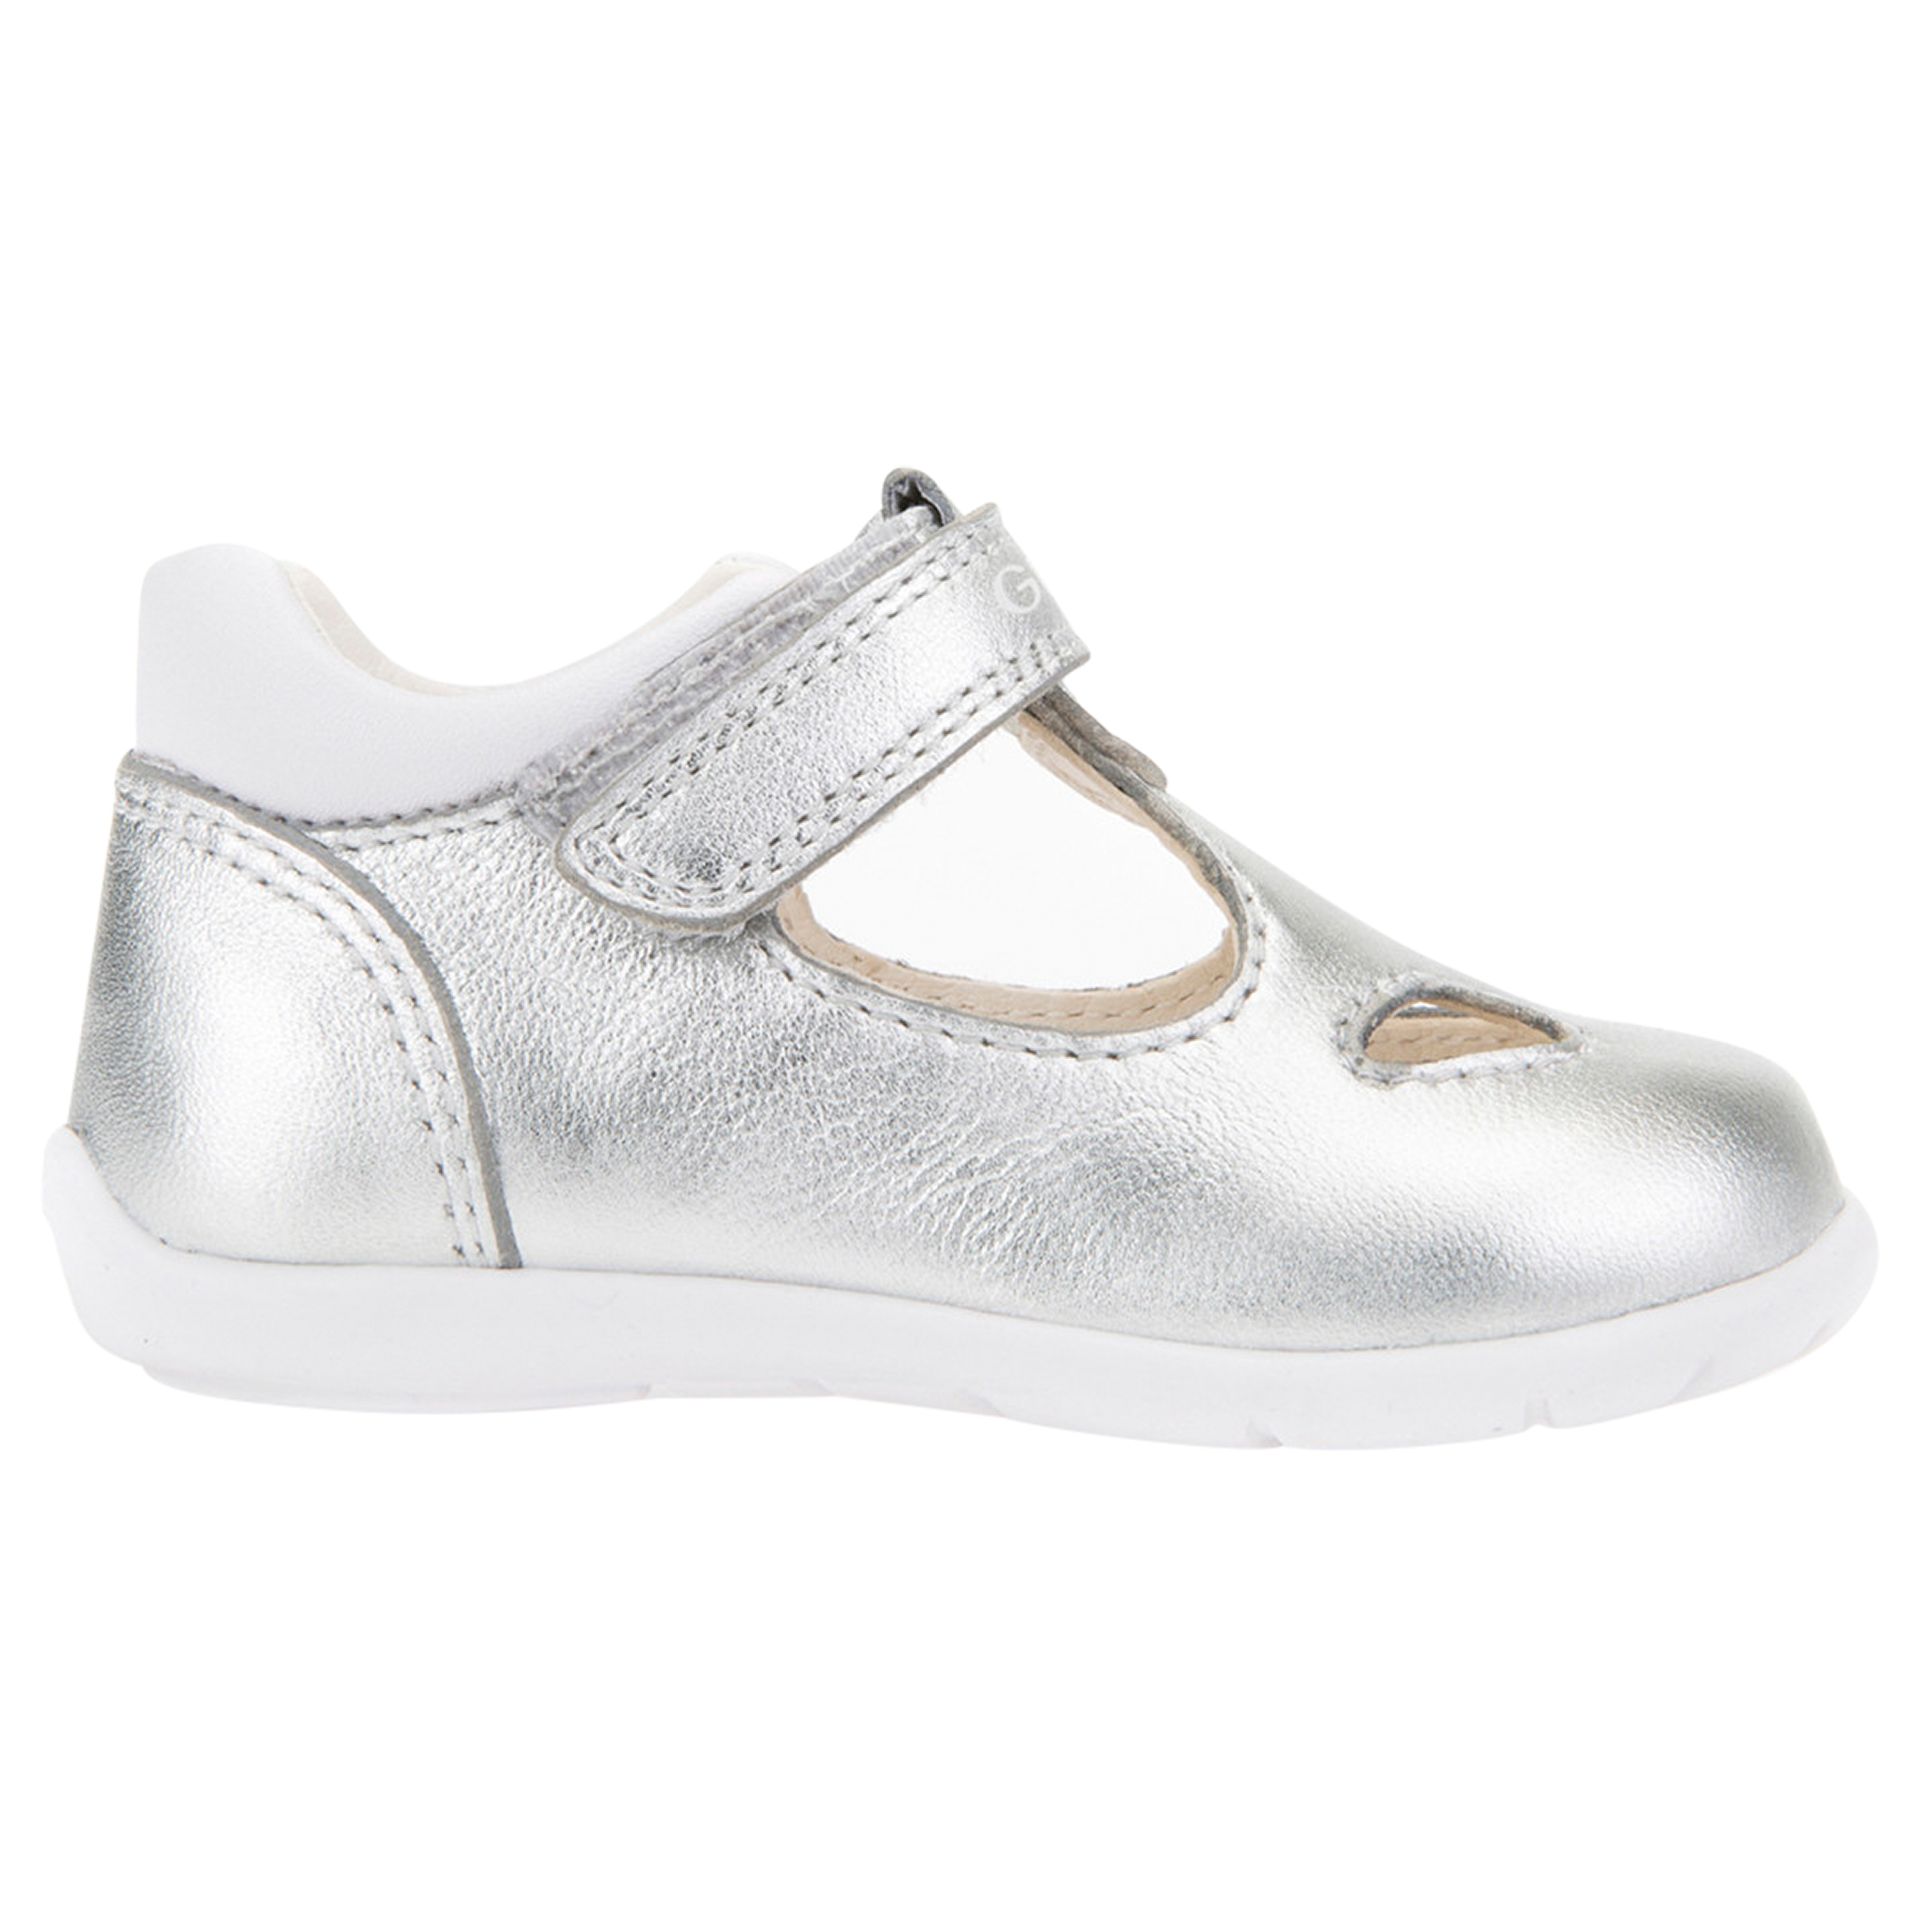 Geox Children's Kaytan Riptape Mary Jane First Shoes, Silver